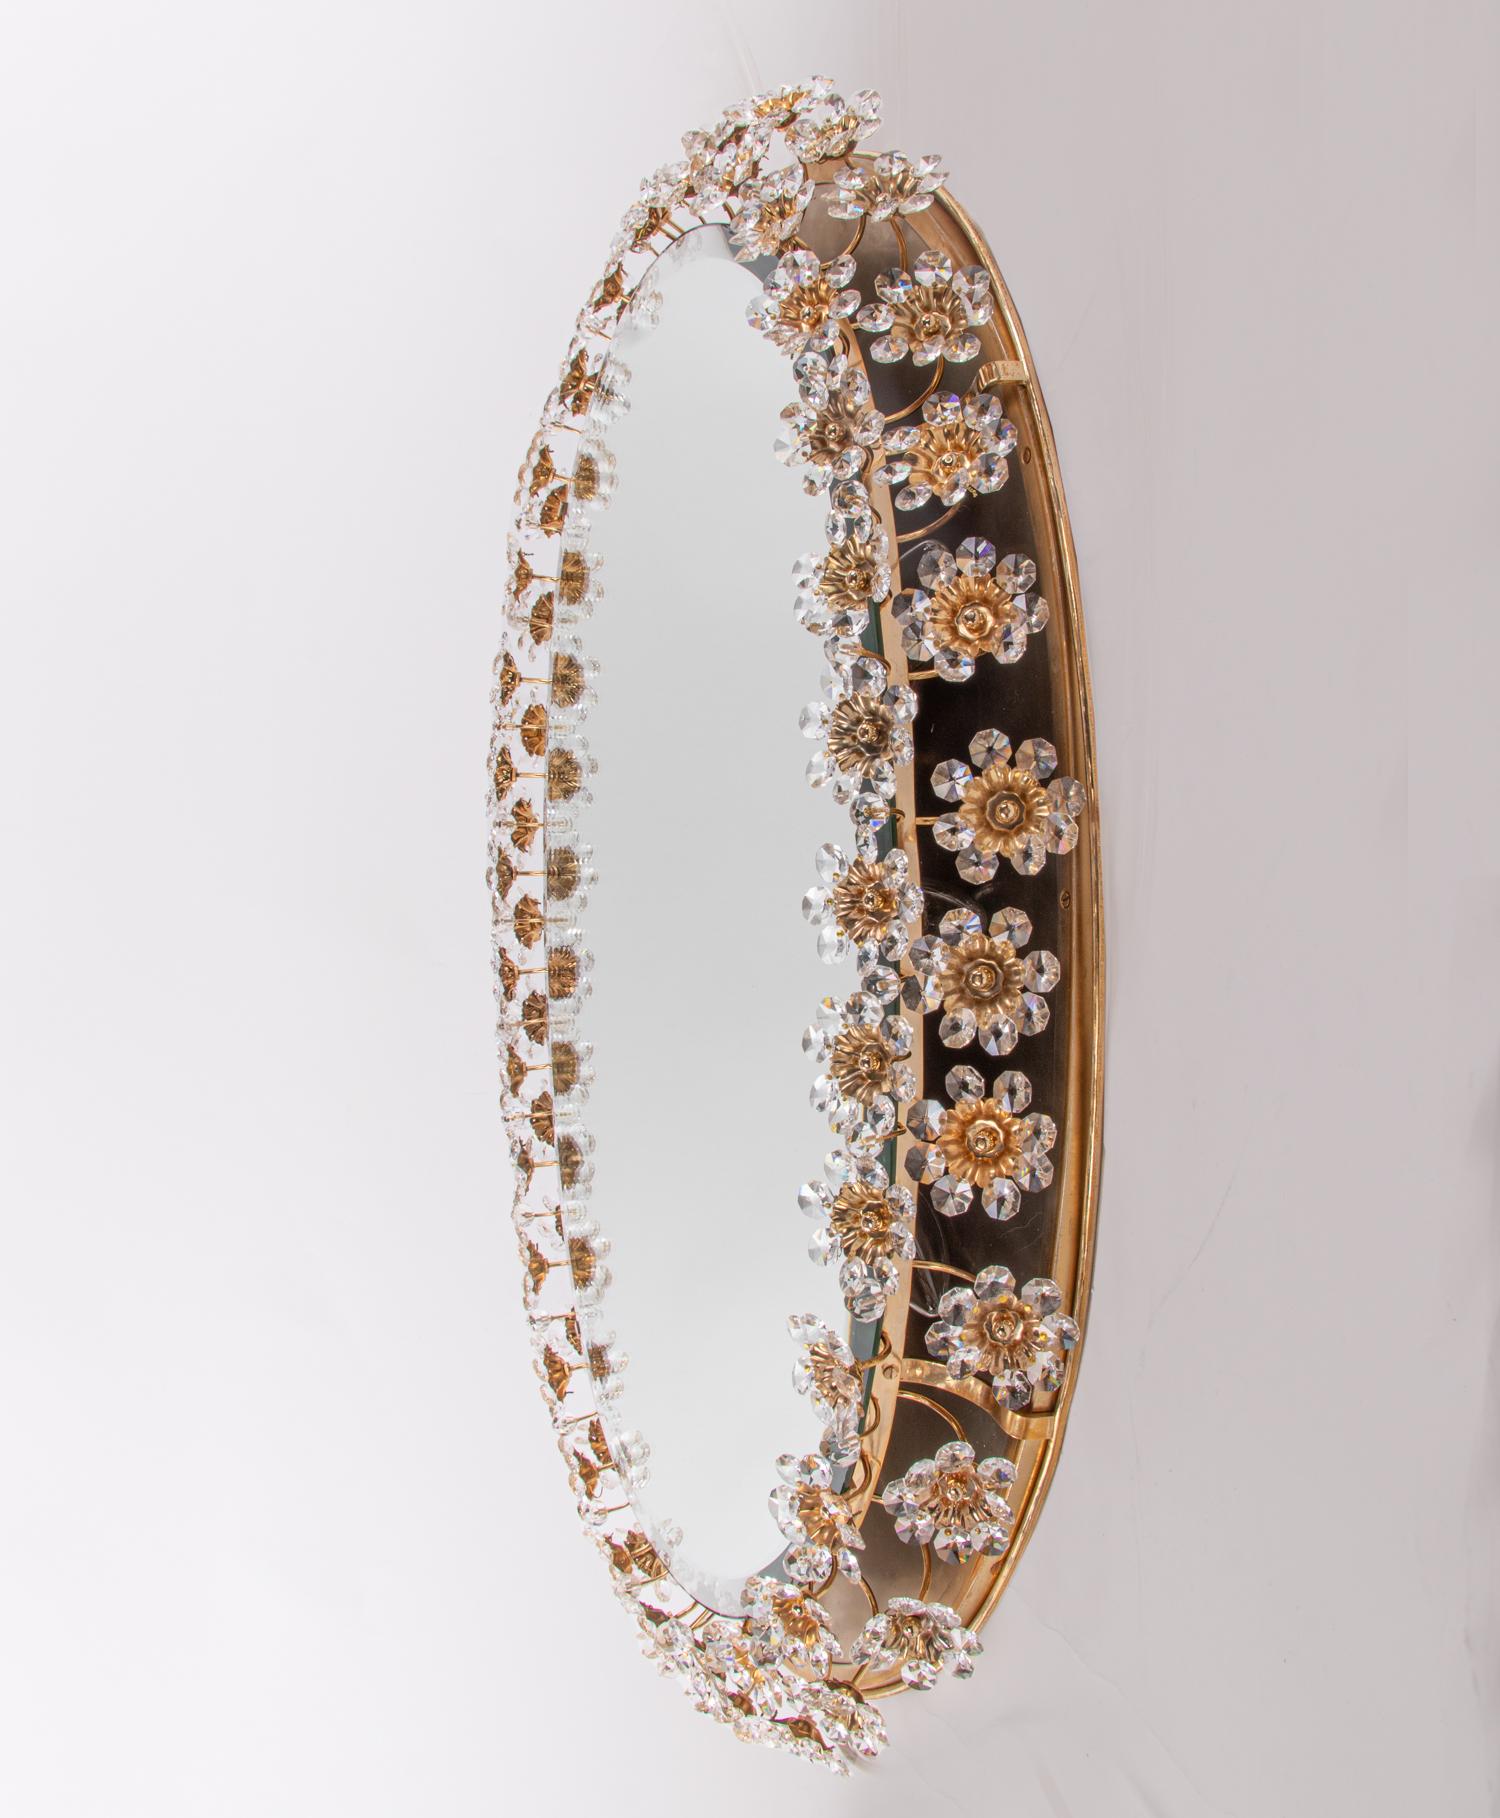 Elegant large illuminated oval backlit mirror with faceted crystals forming petals and flowers on a gilded brass frame. Desinged by Christoph Palme attr. Manufactured by Palwa, Germany, 1960s. 

Design: Christoph Palme attr. 
Model: Sputnik